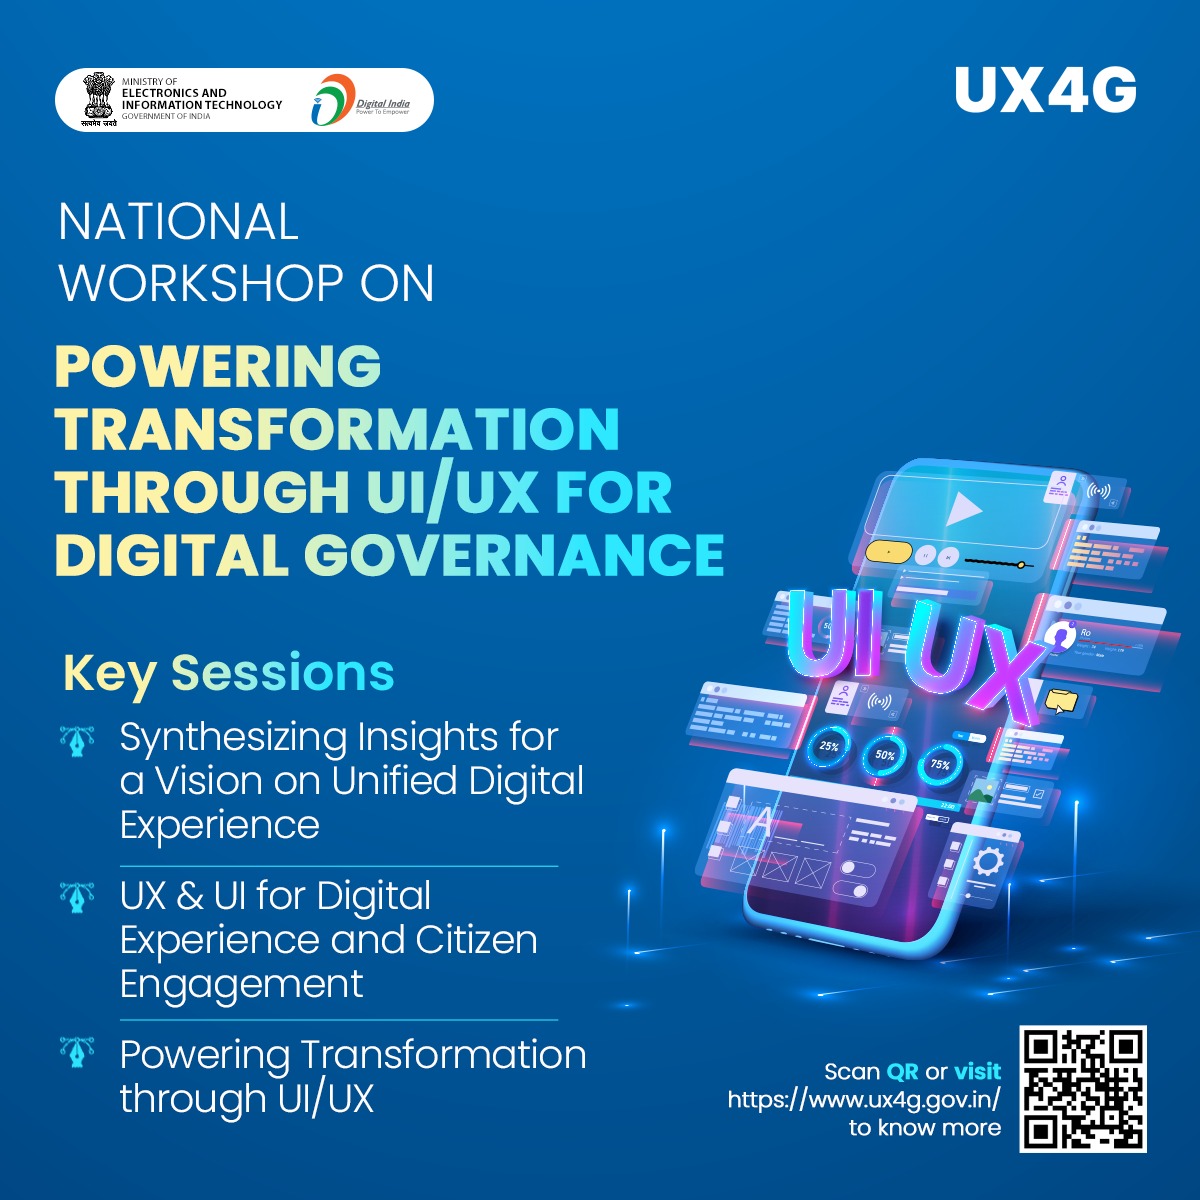 The National Workshop on Powering Transformation through #UIUX for #DigitalGovernance on May 28 is an opportunity to gain a comprehensive understanding of UI/UX guidelines, case studies, good practices & strategies. Watch it LIVE at youtube.com/live/M2m9wG1bK… #DigitalIndia